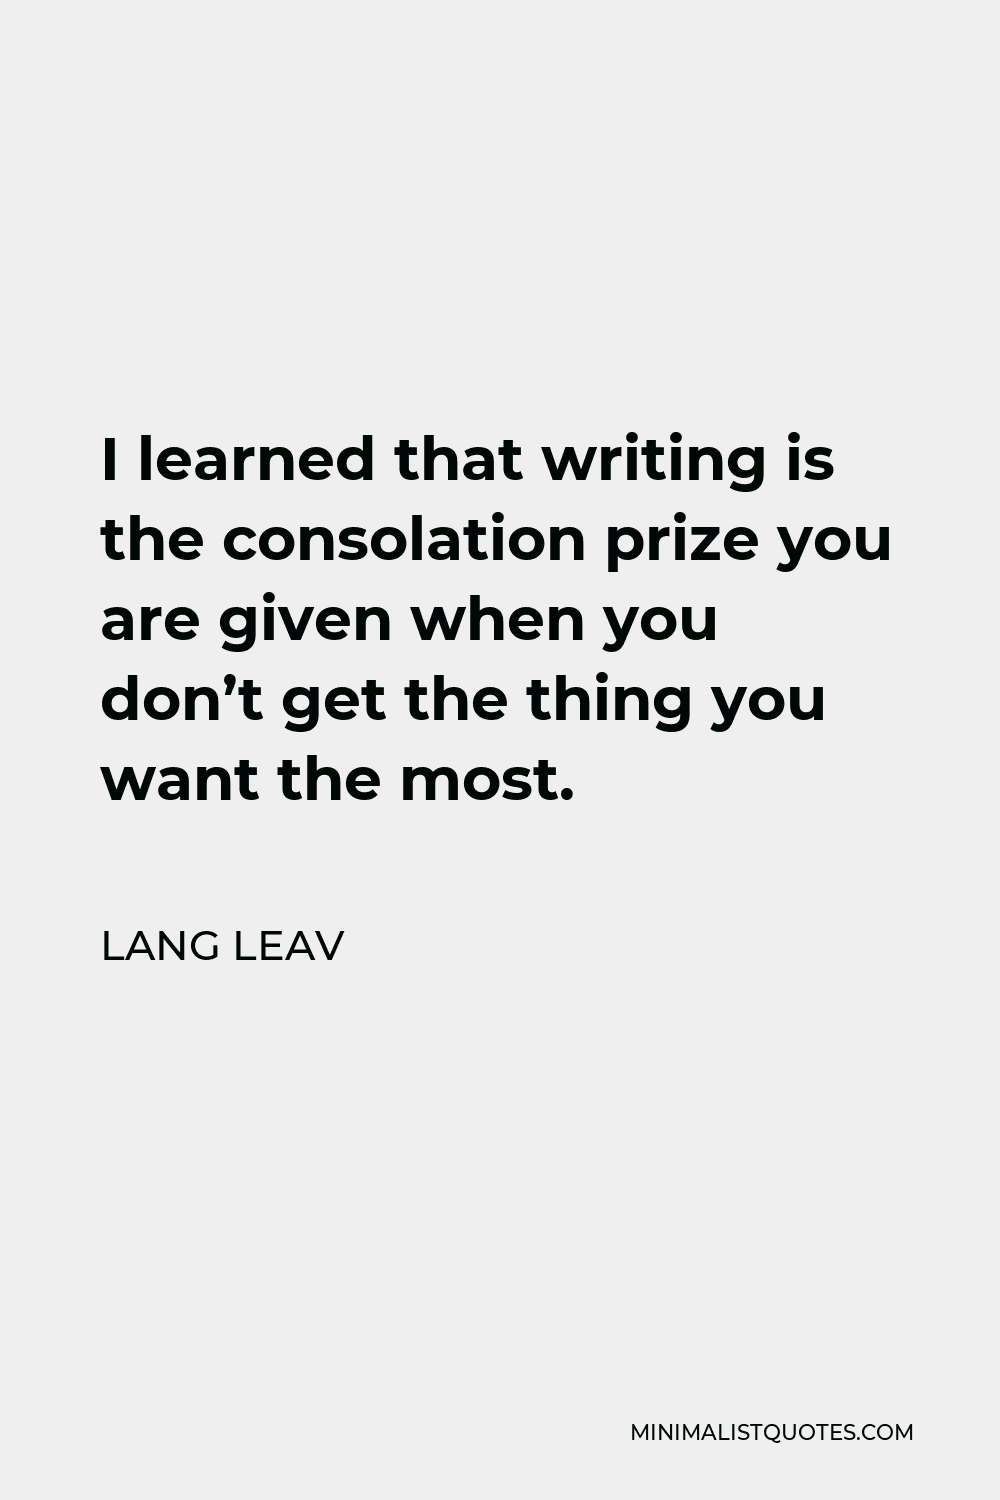 Lang Leav Quote - I learned that writing is the consolation prize you are given when you don’t get the thing you want the most.